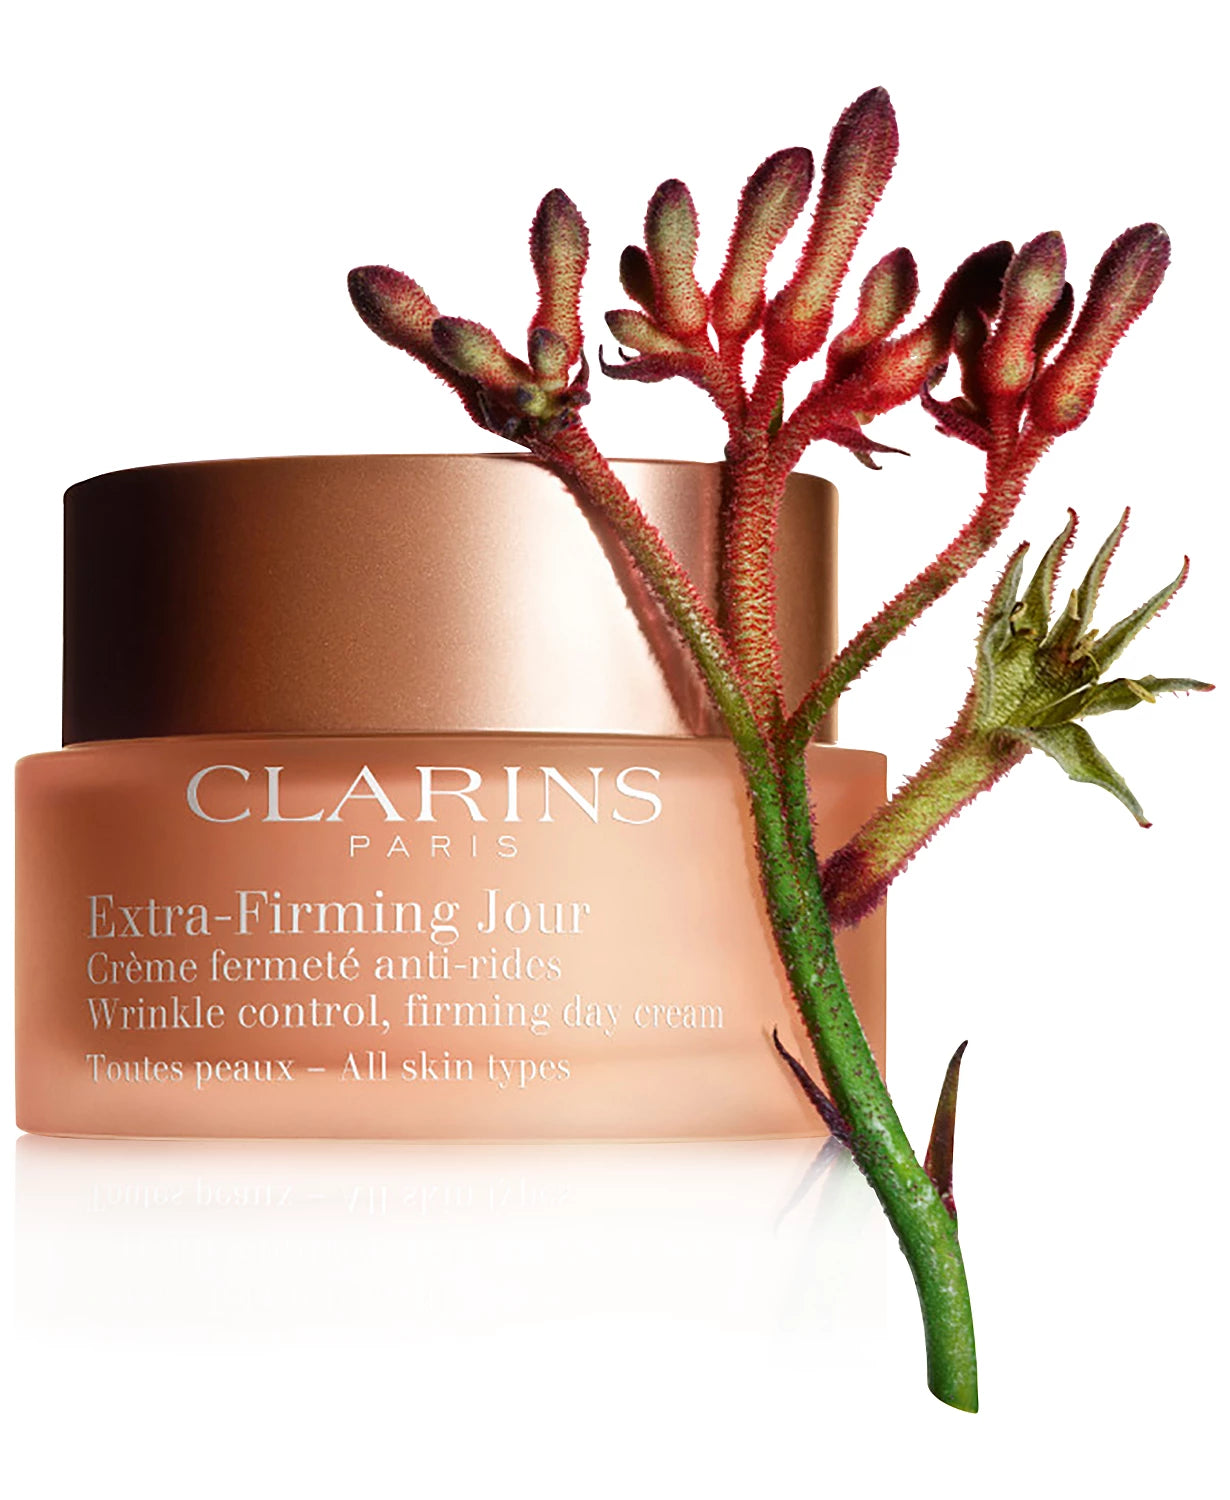 Clarins Extra-Firming Jour Wrinkle Control, Firming Day Cream